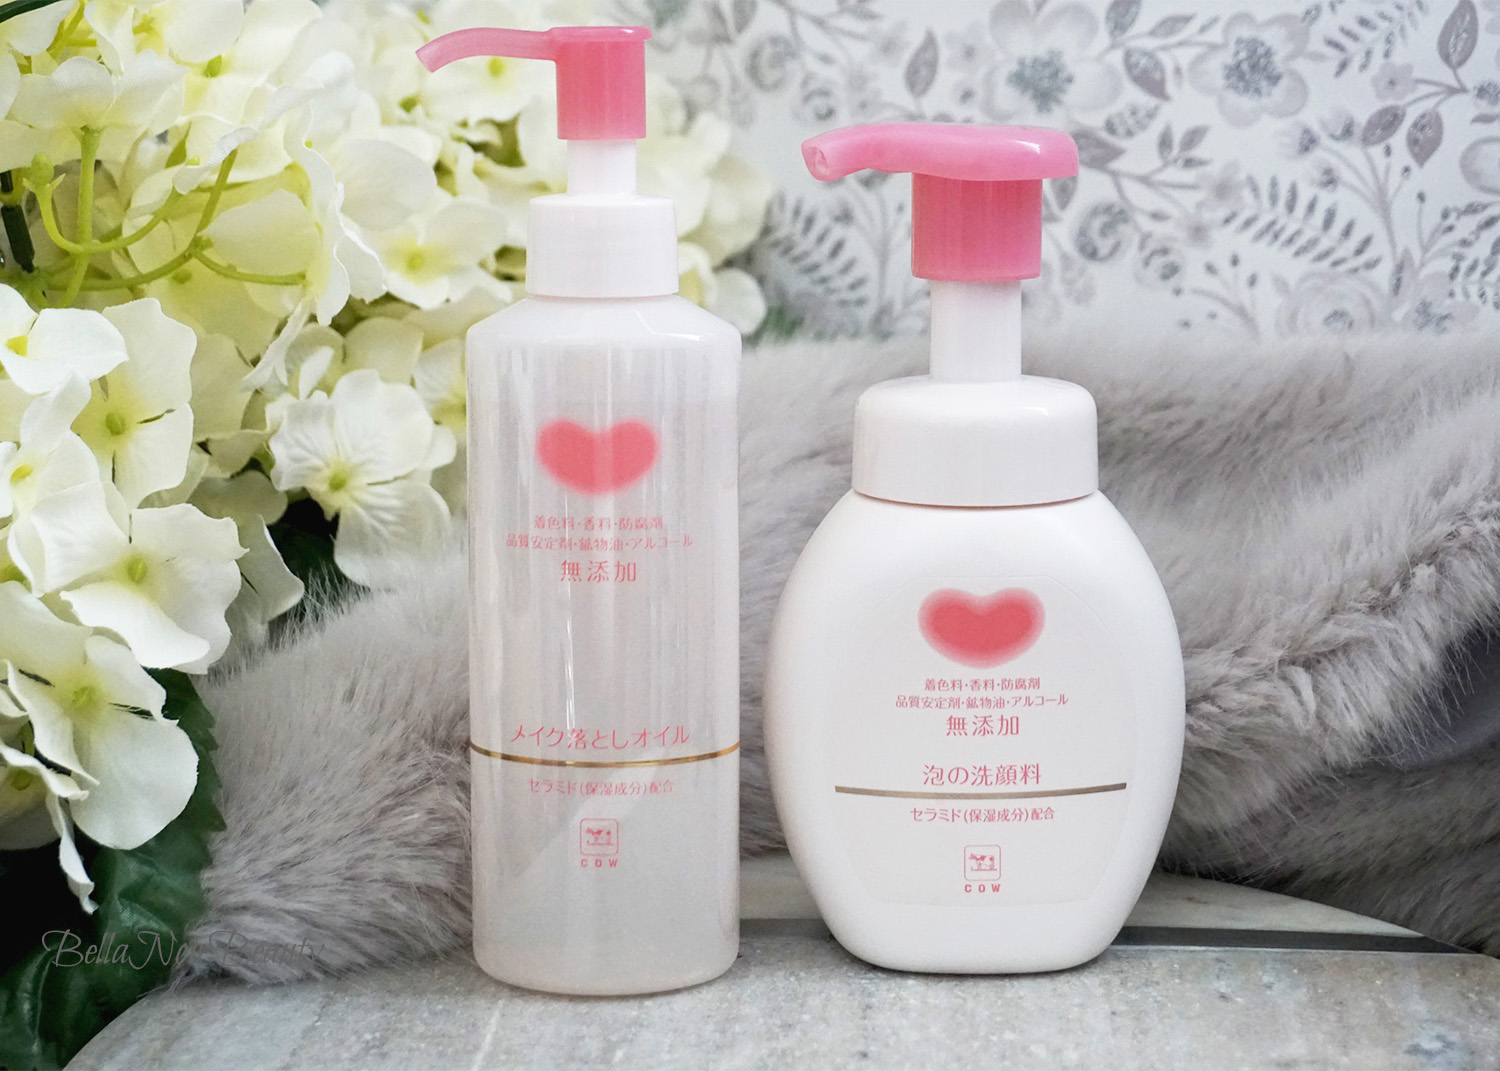 Cow Brand Gyunyu Cleansing Oil and Foaming Facial Cleanser | bellanoirbeauty.com